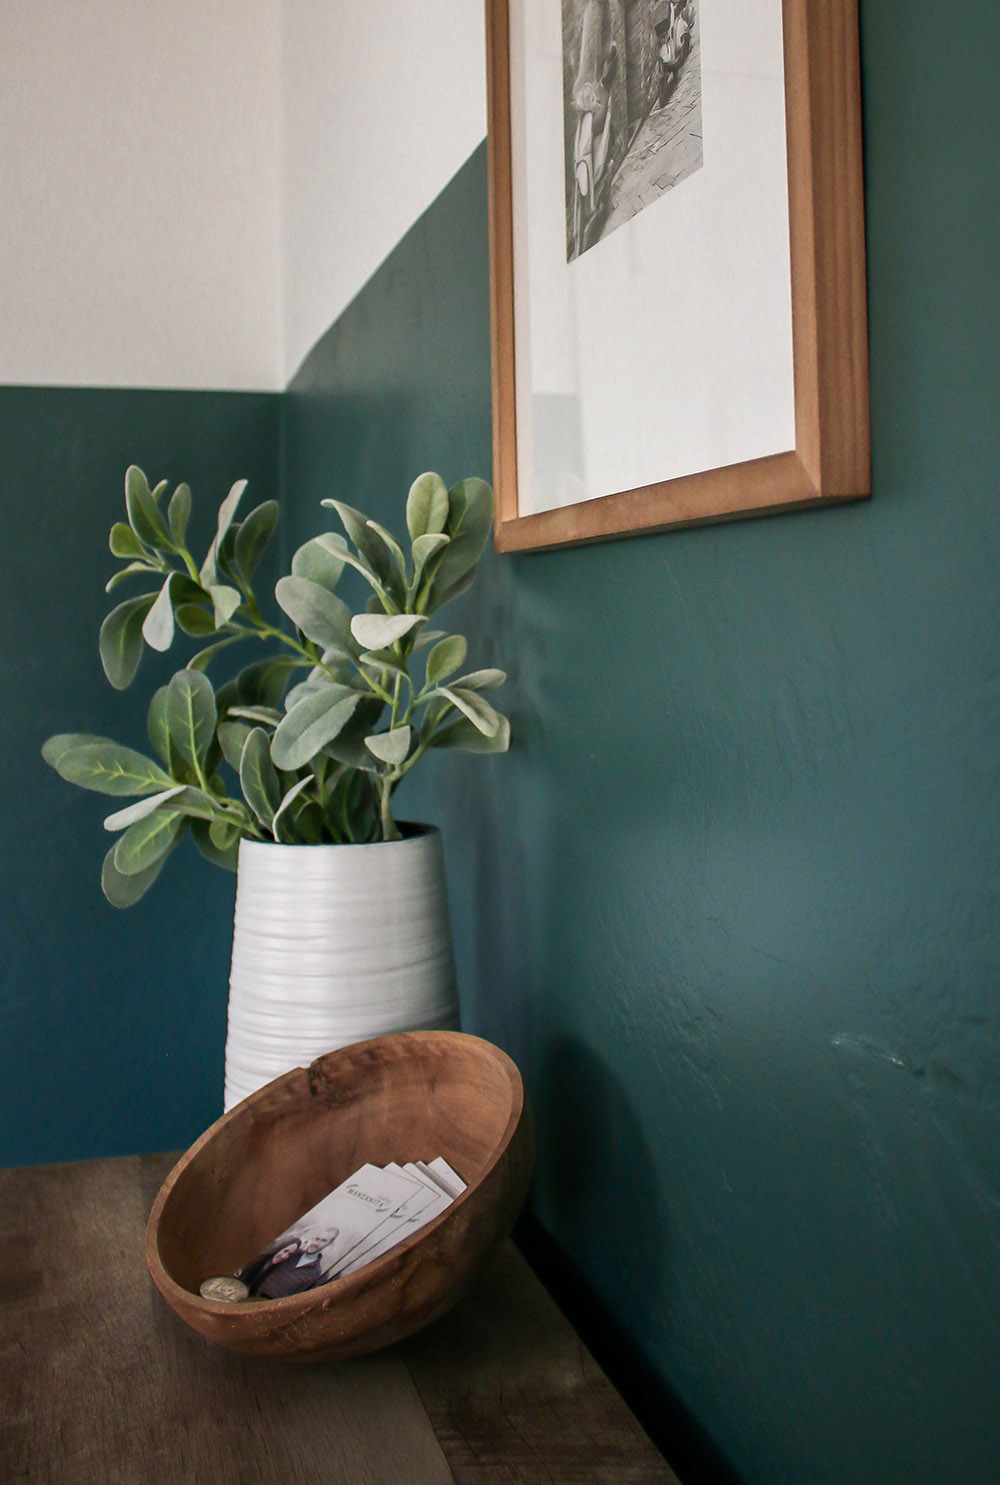 A dark green and white wall with a framed piece of art work and a wood table with a white vase and wooden bowl.